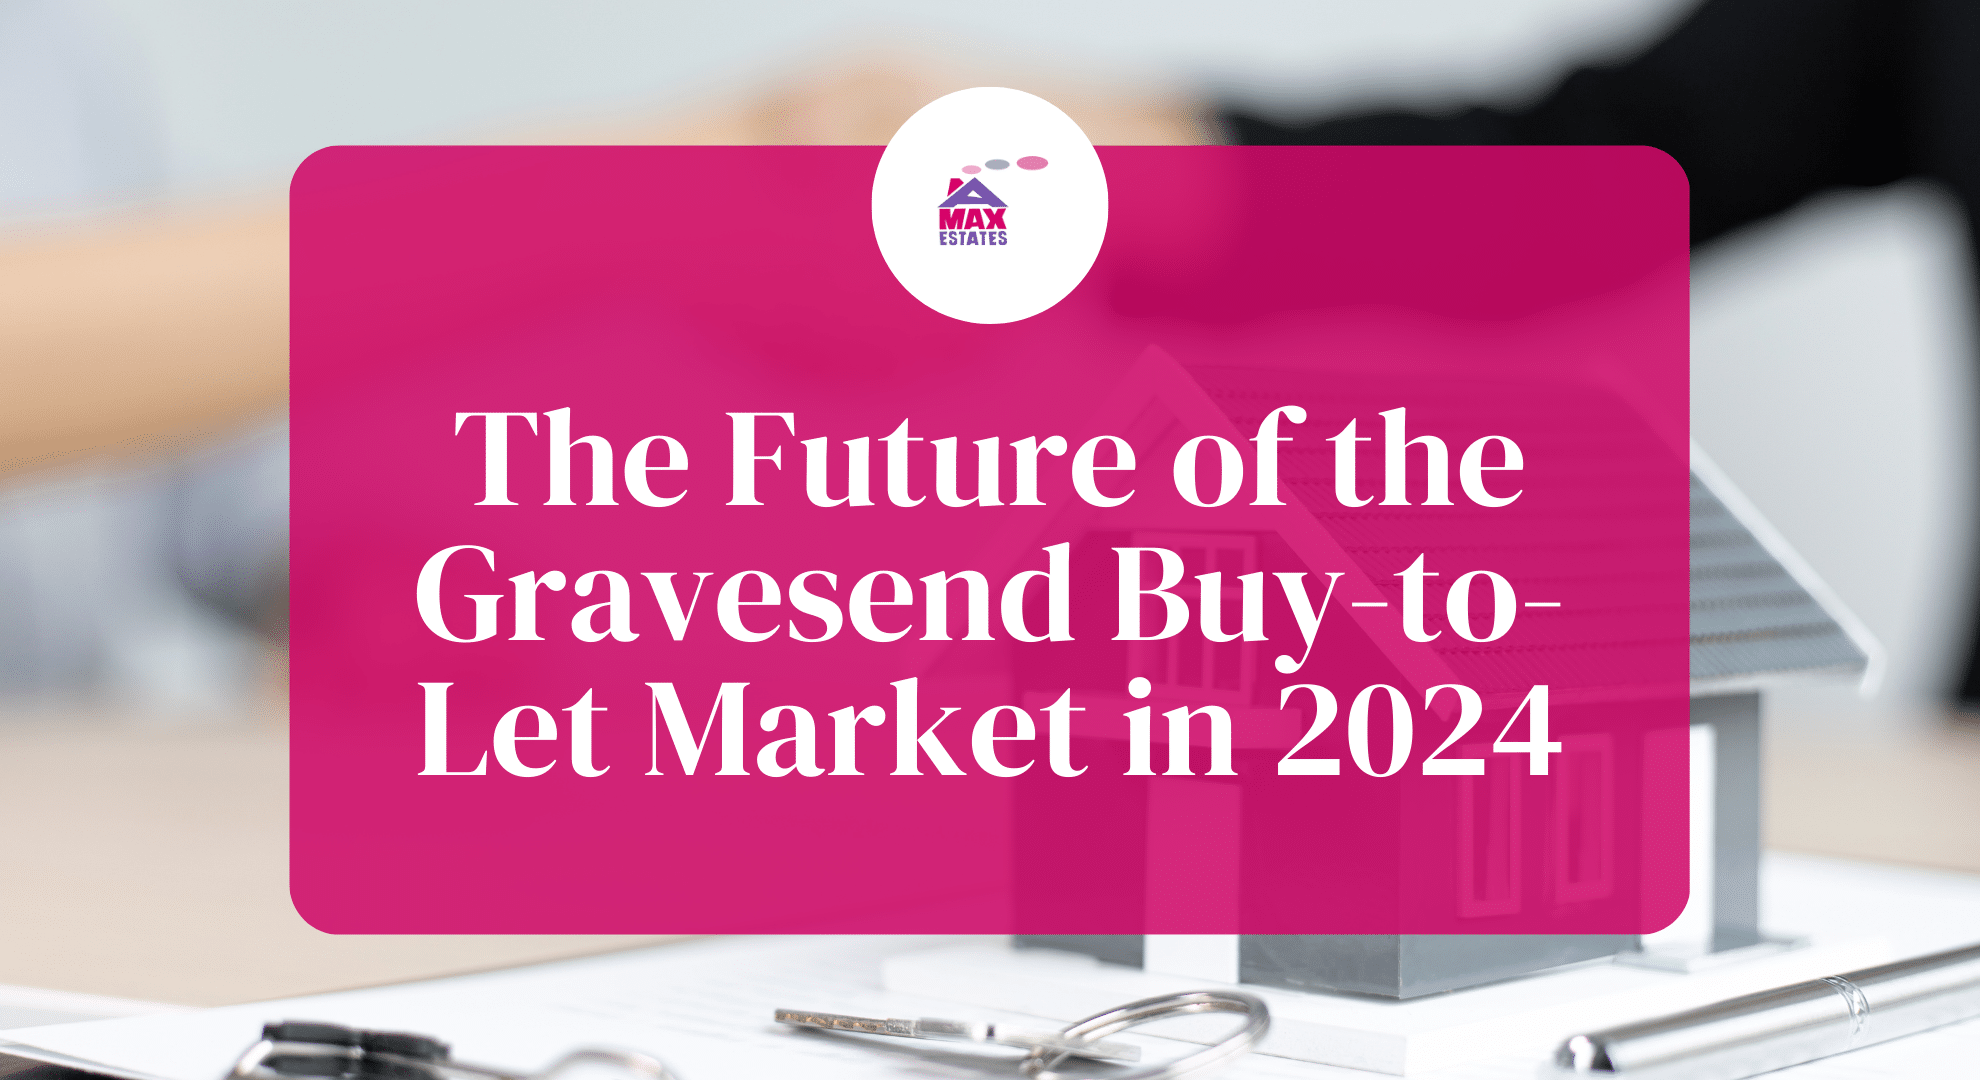 The Future of the Gravesend Buy-to-Let Market in 2024